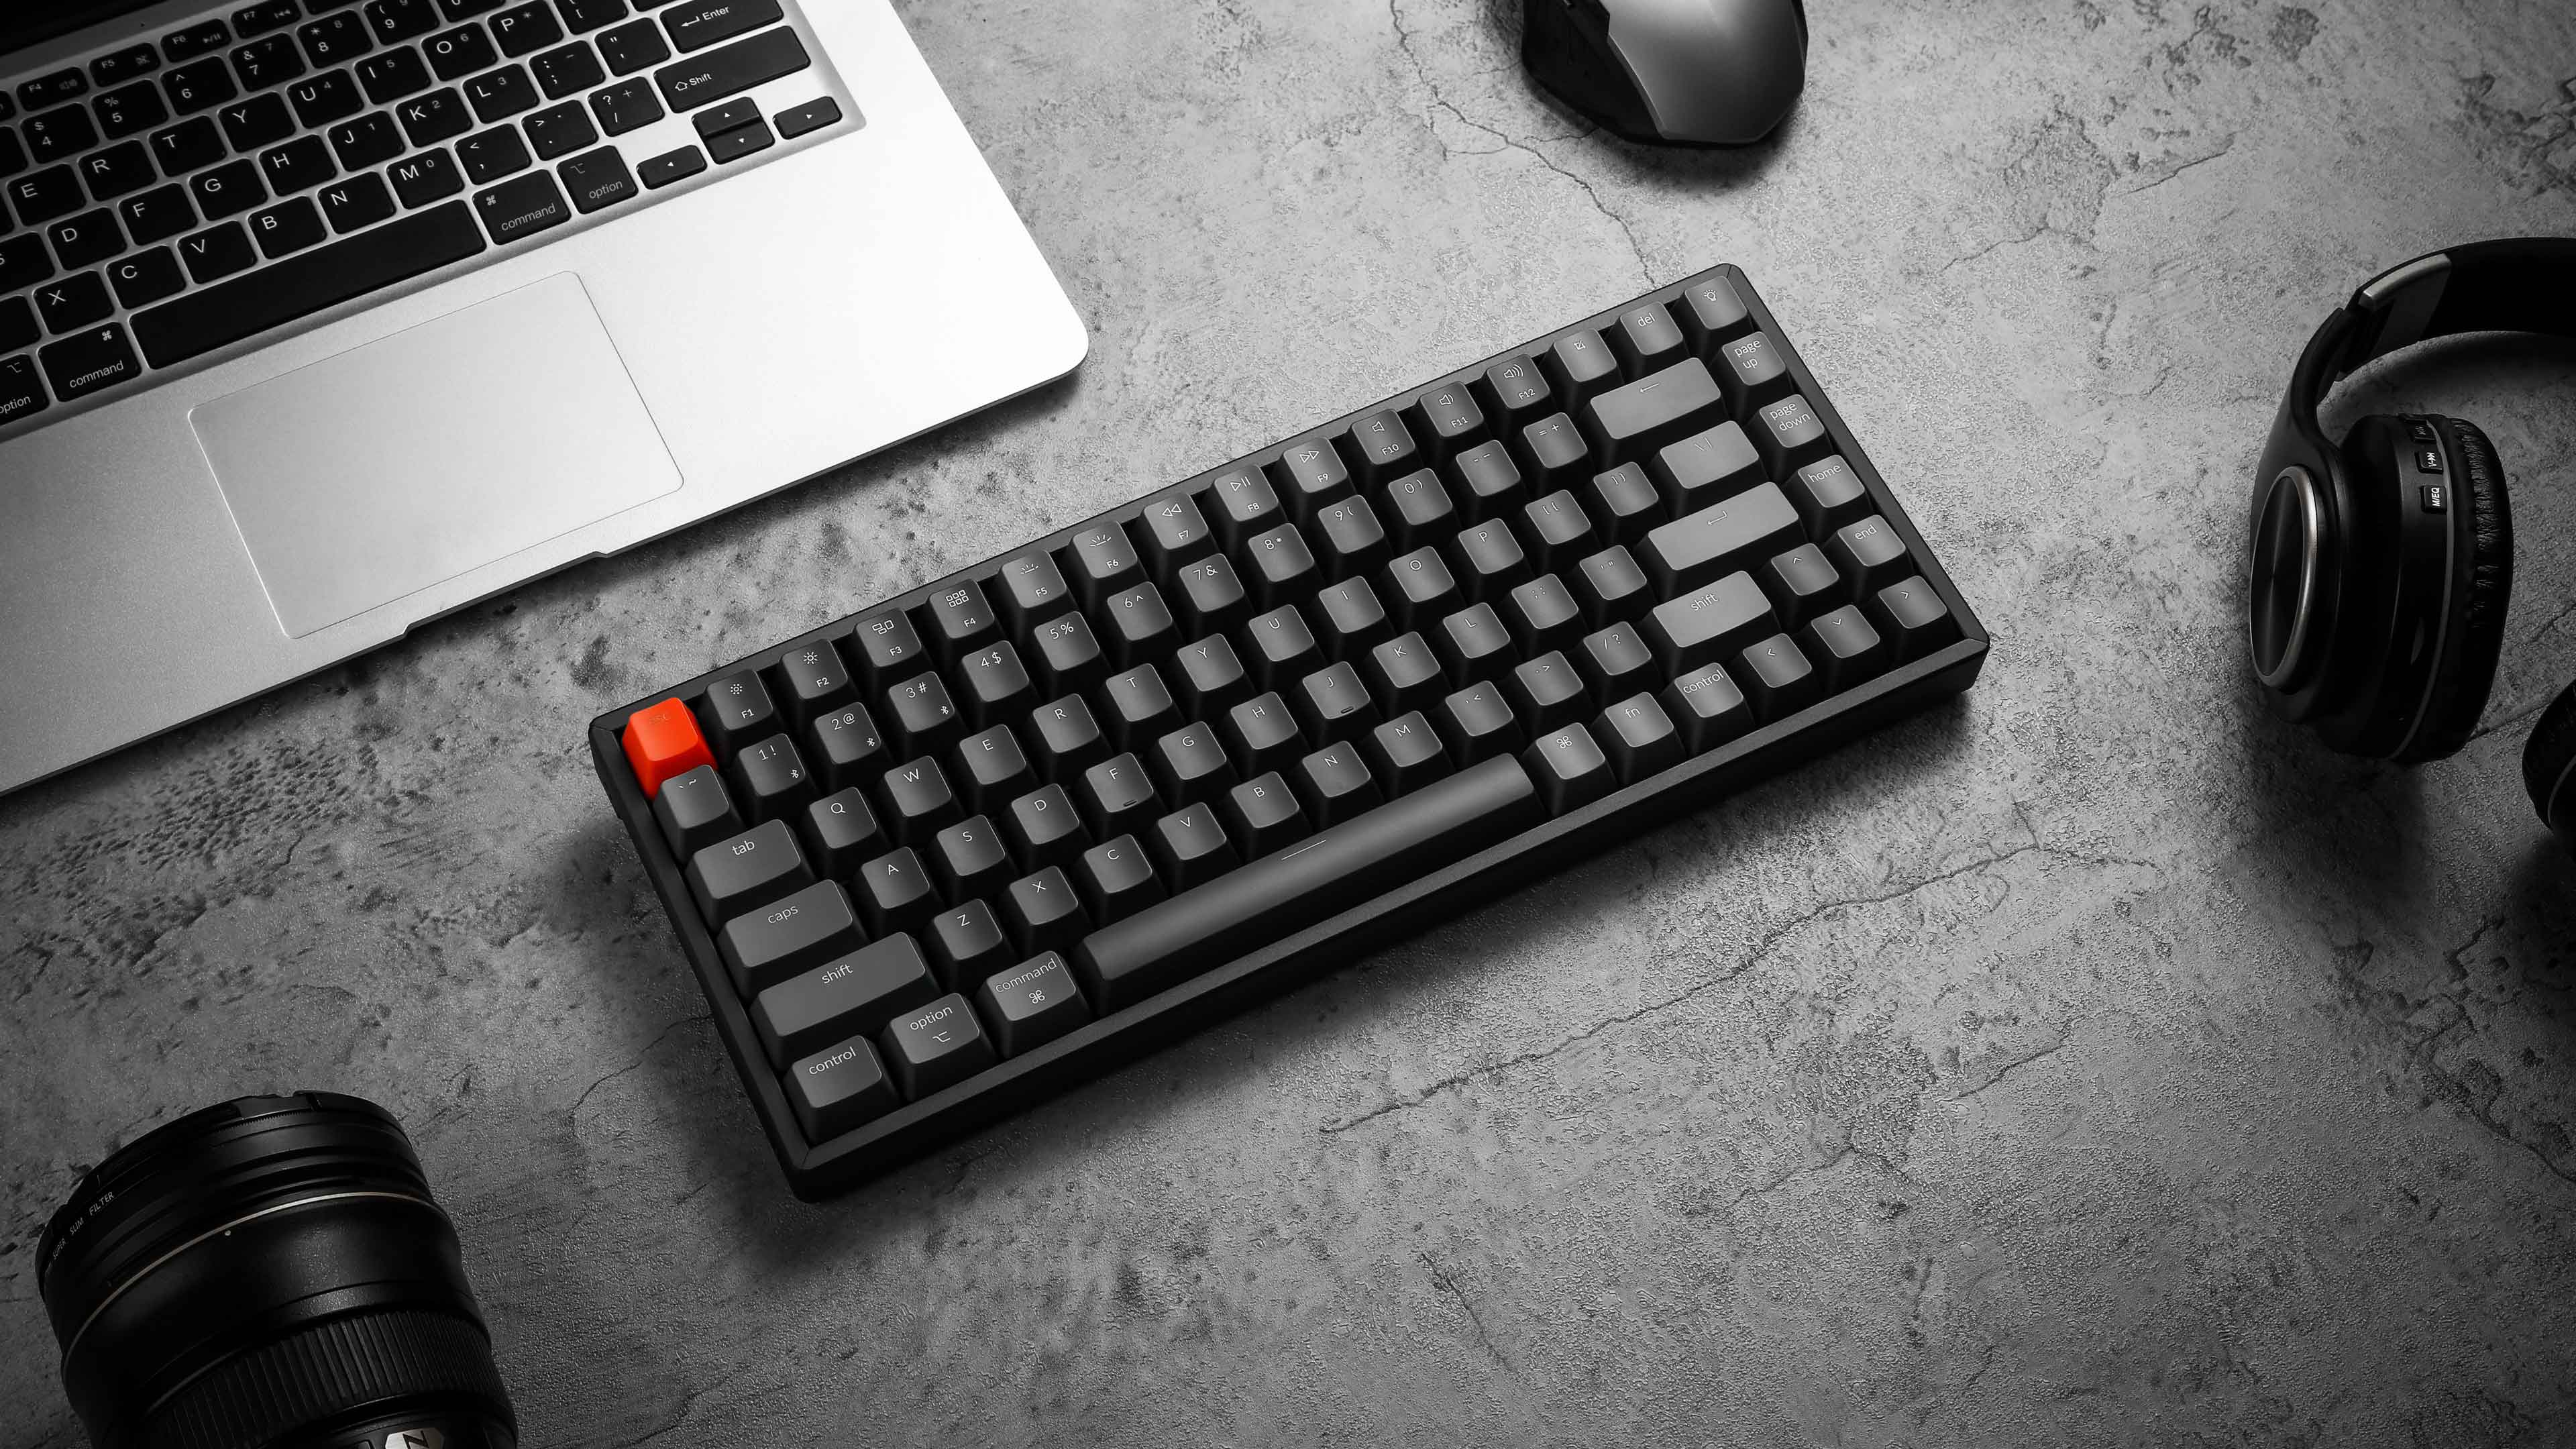 Keychron k2 wireless mechanical keyboard cordless and type-c cable mode